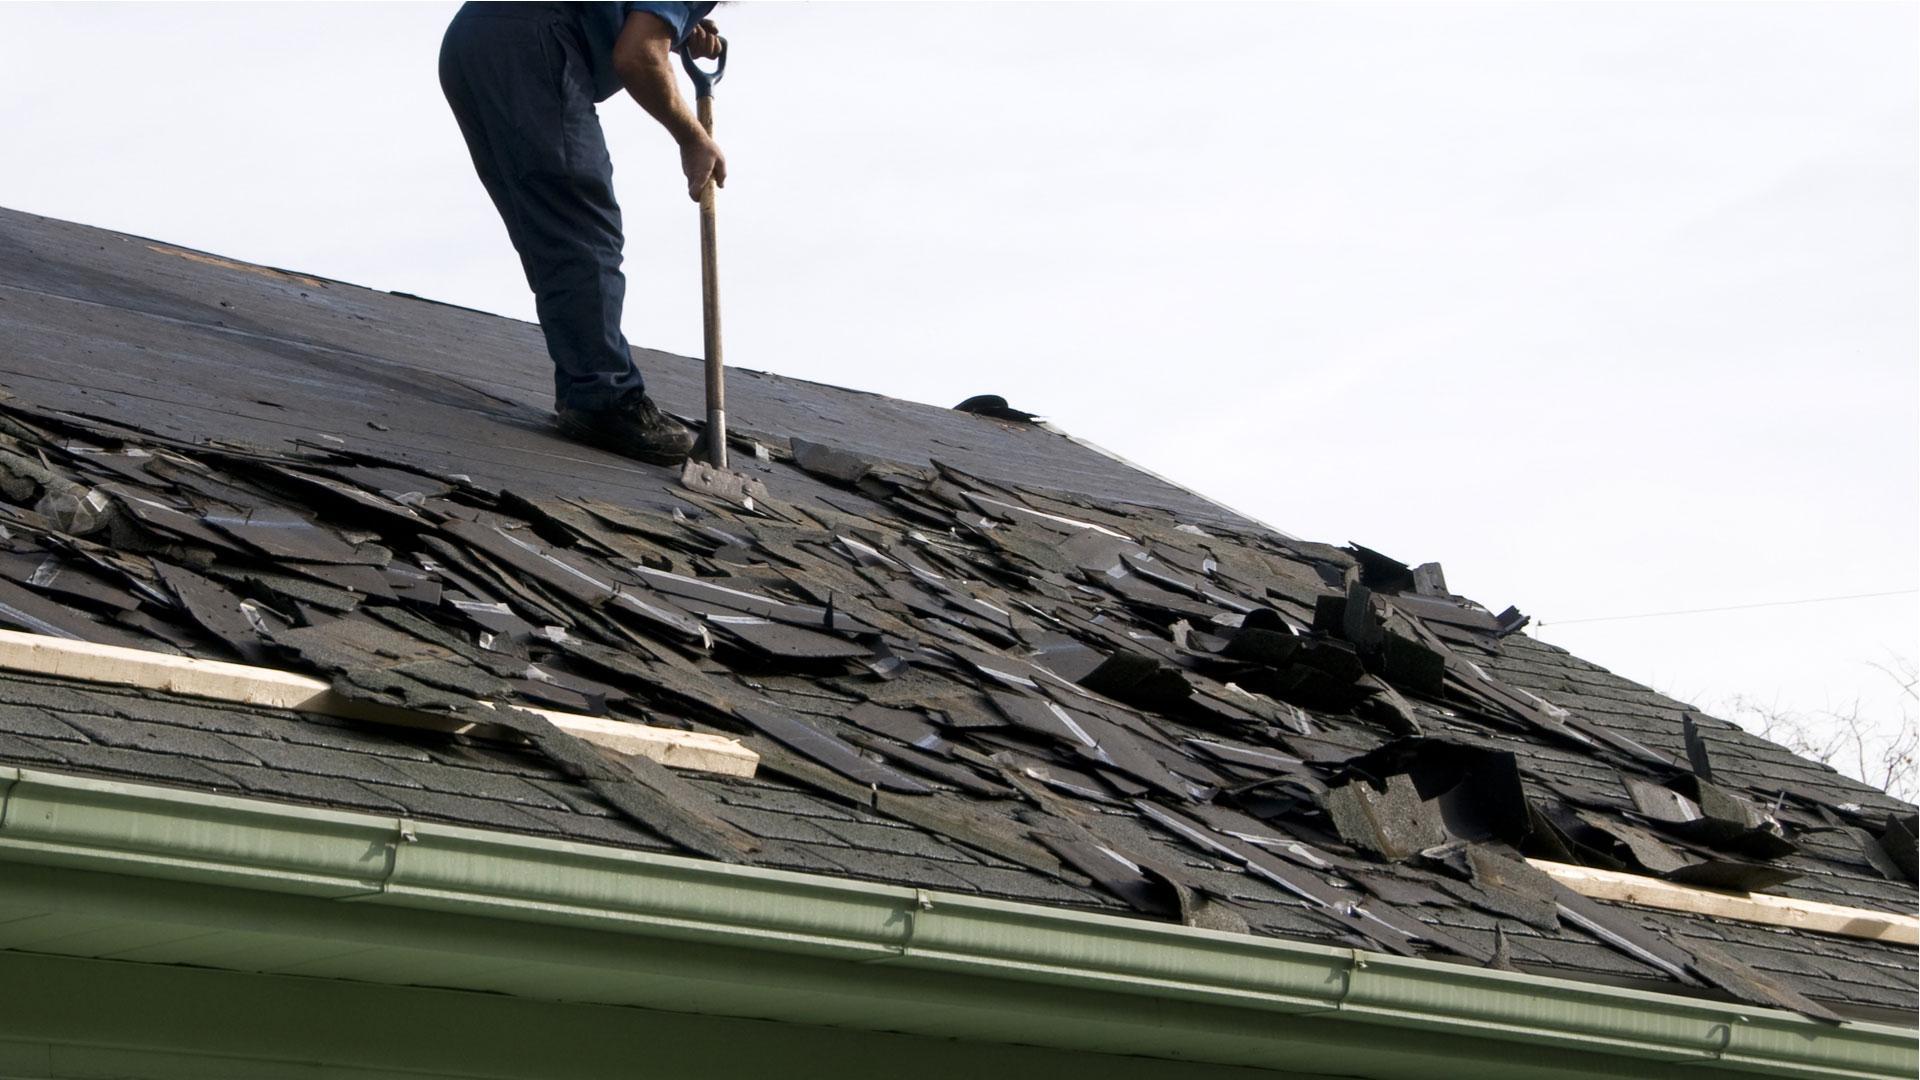 Houston Roof Repair Versus Roof Replacement: Which is Better?